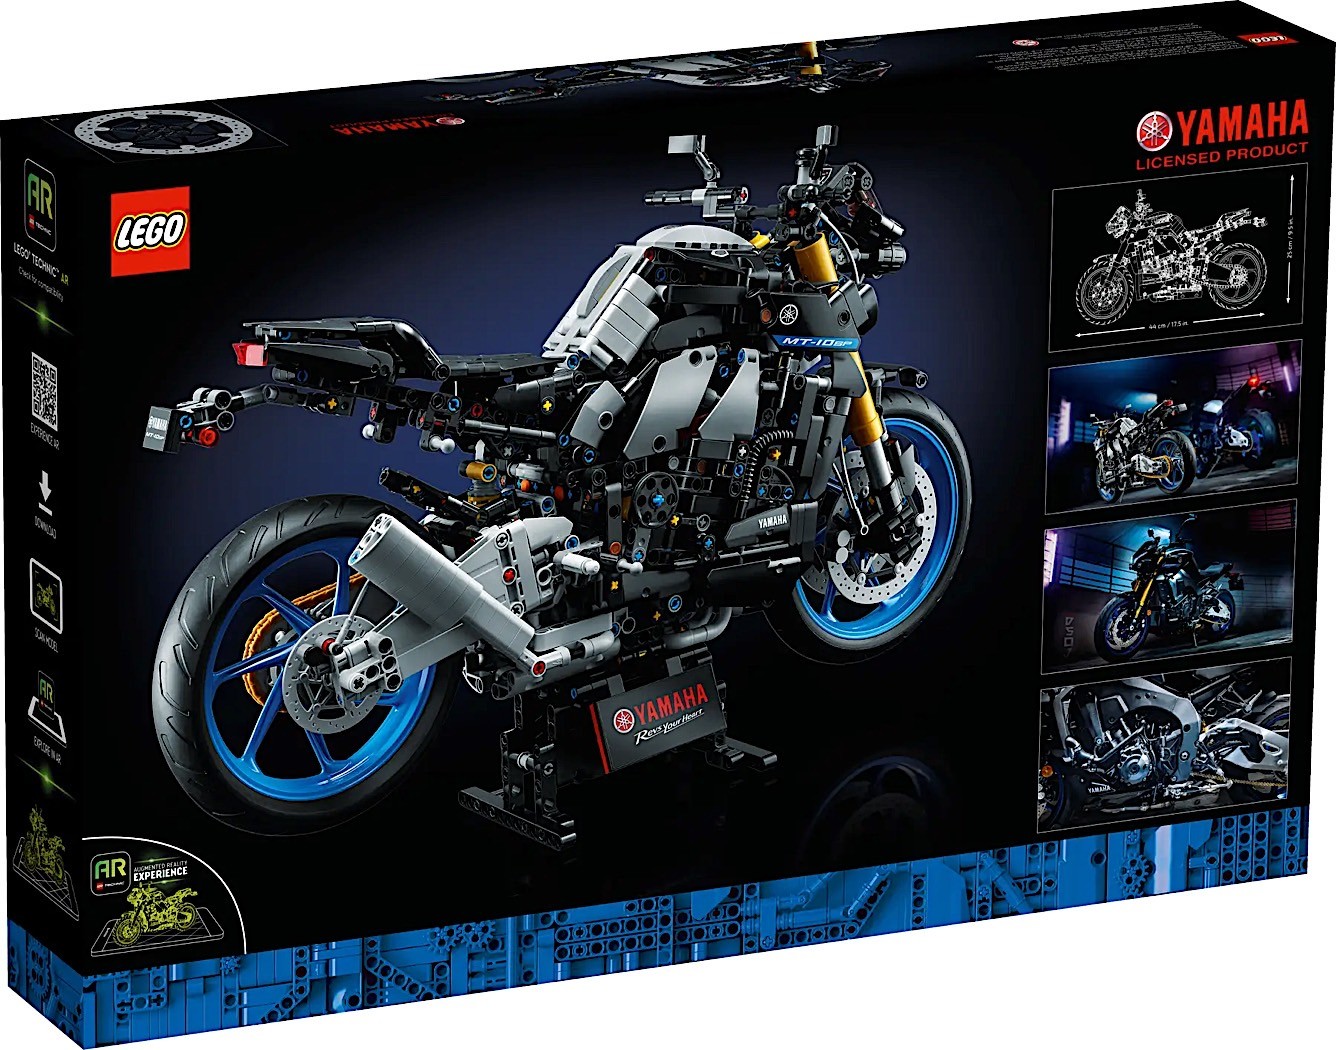 yamaha mt 10 sp comes together from 1478 lego pieces just as aggressive as the real deal 5